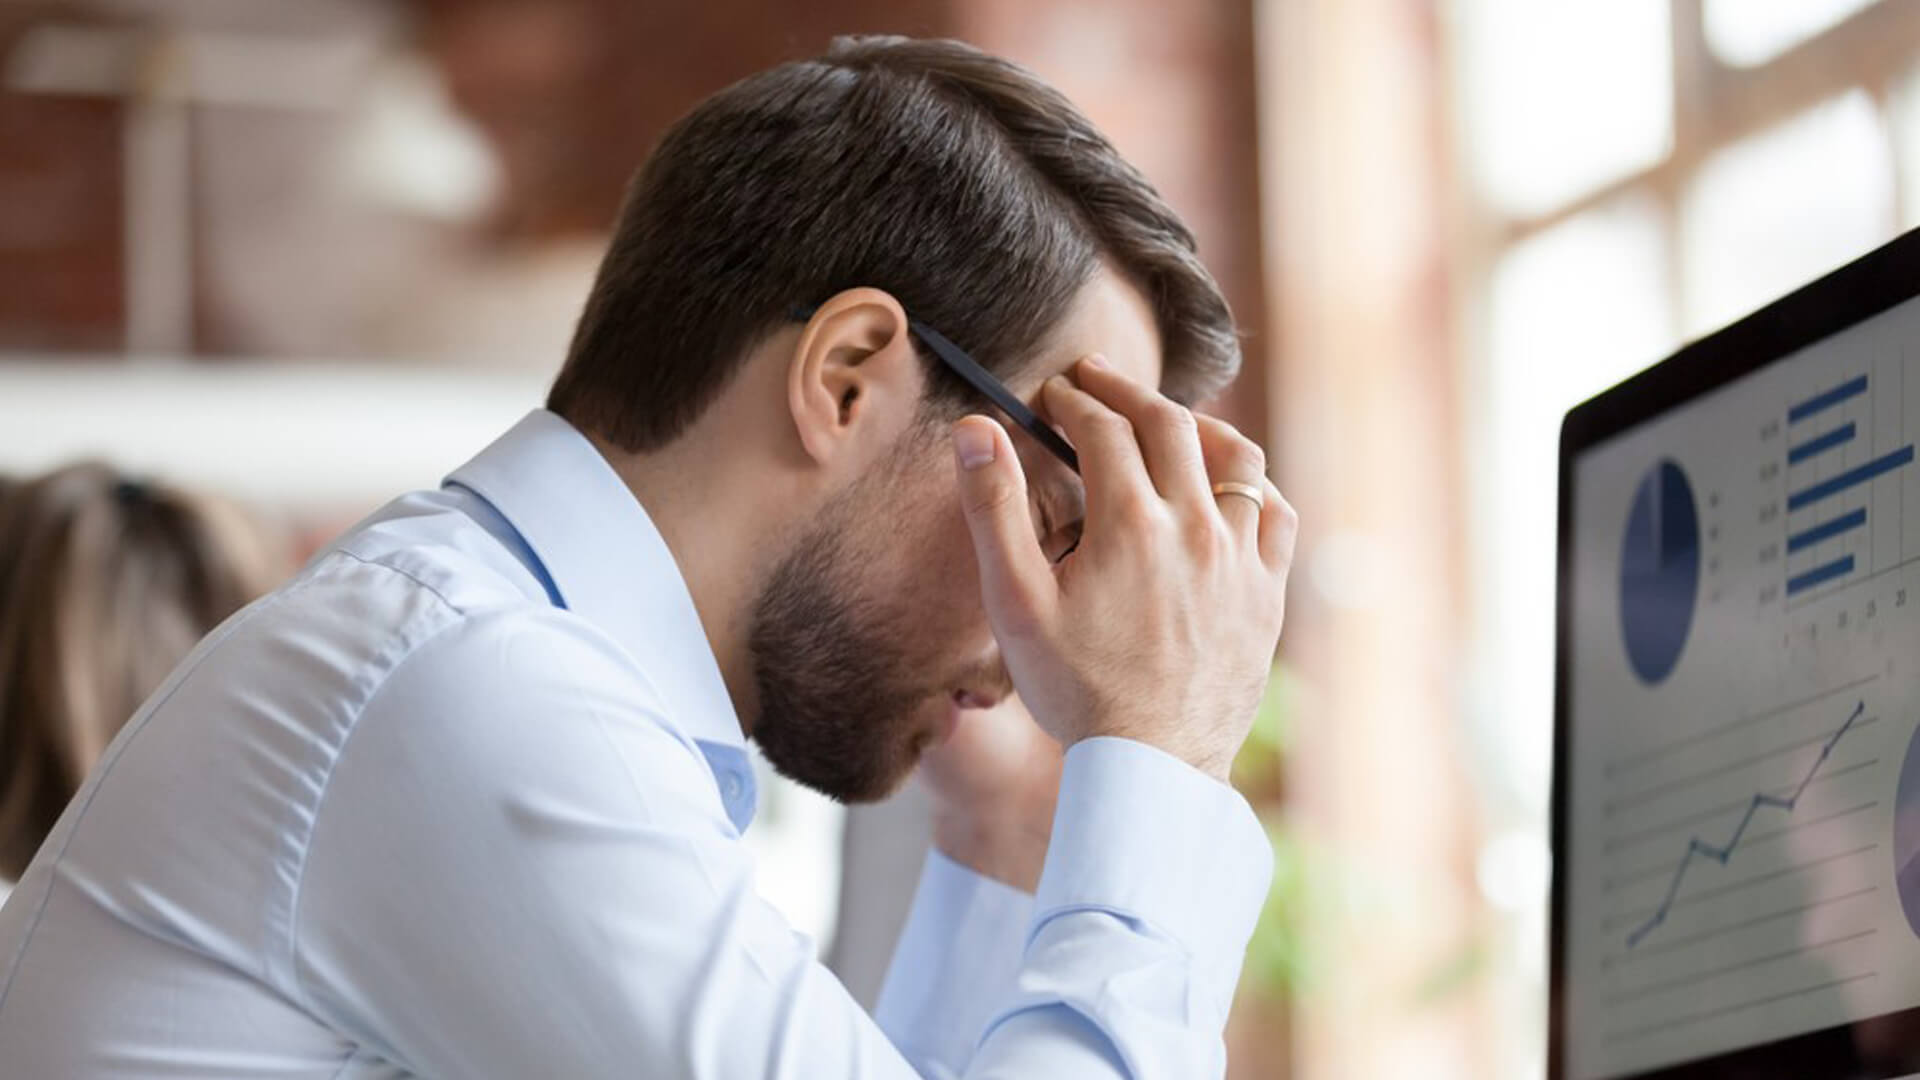 Workplace Stress and Pain